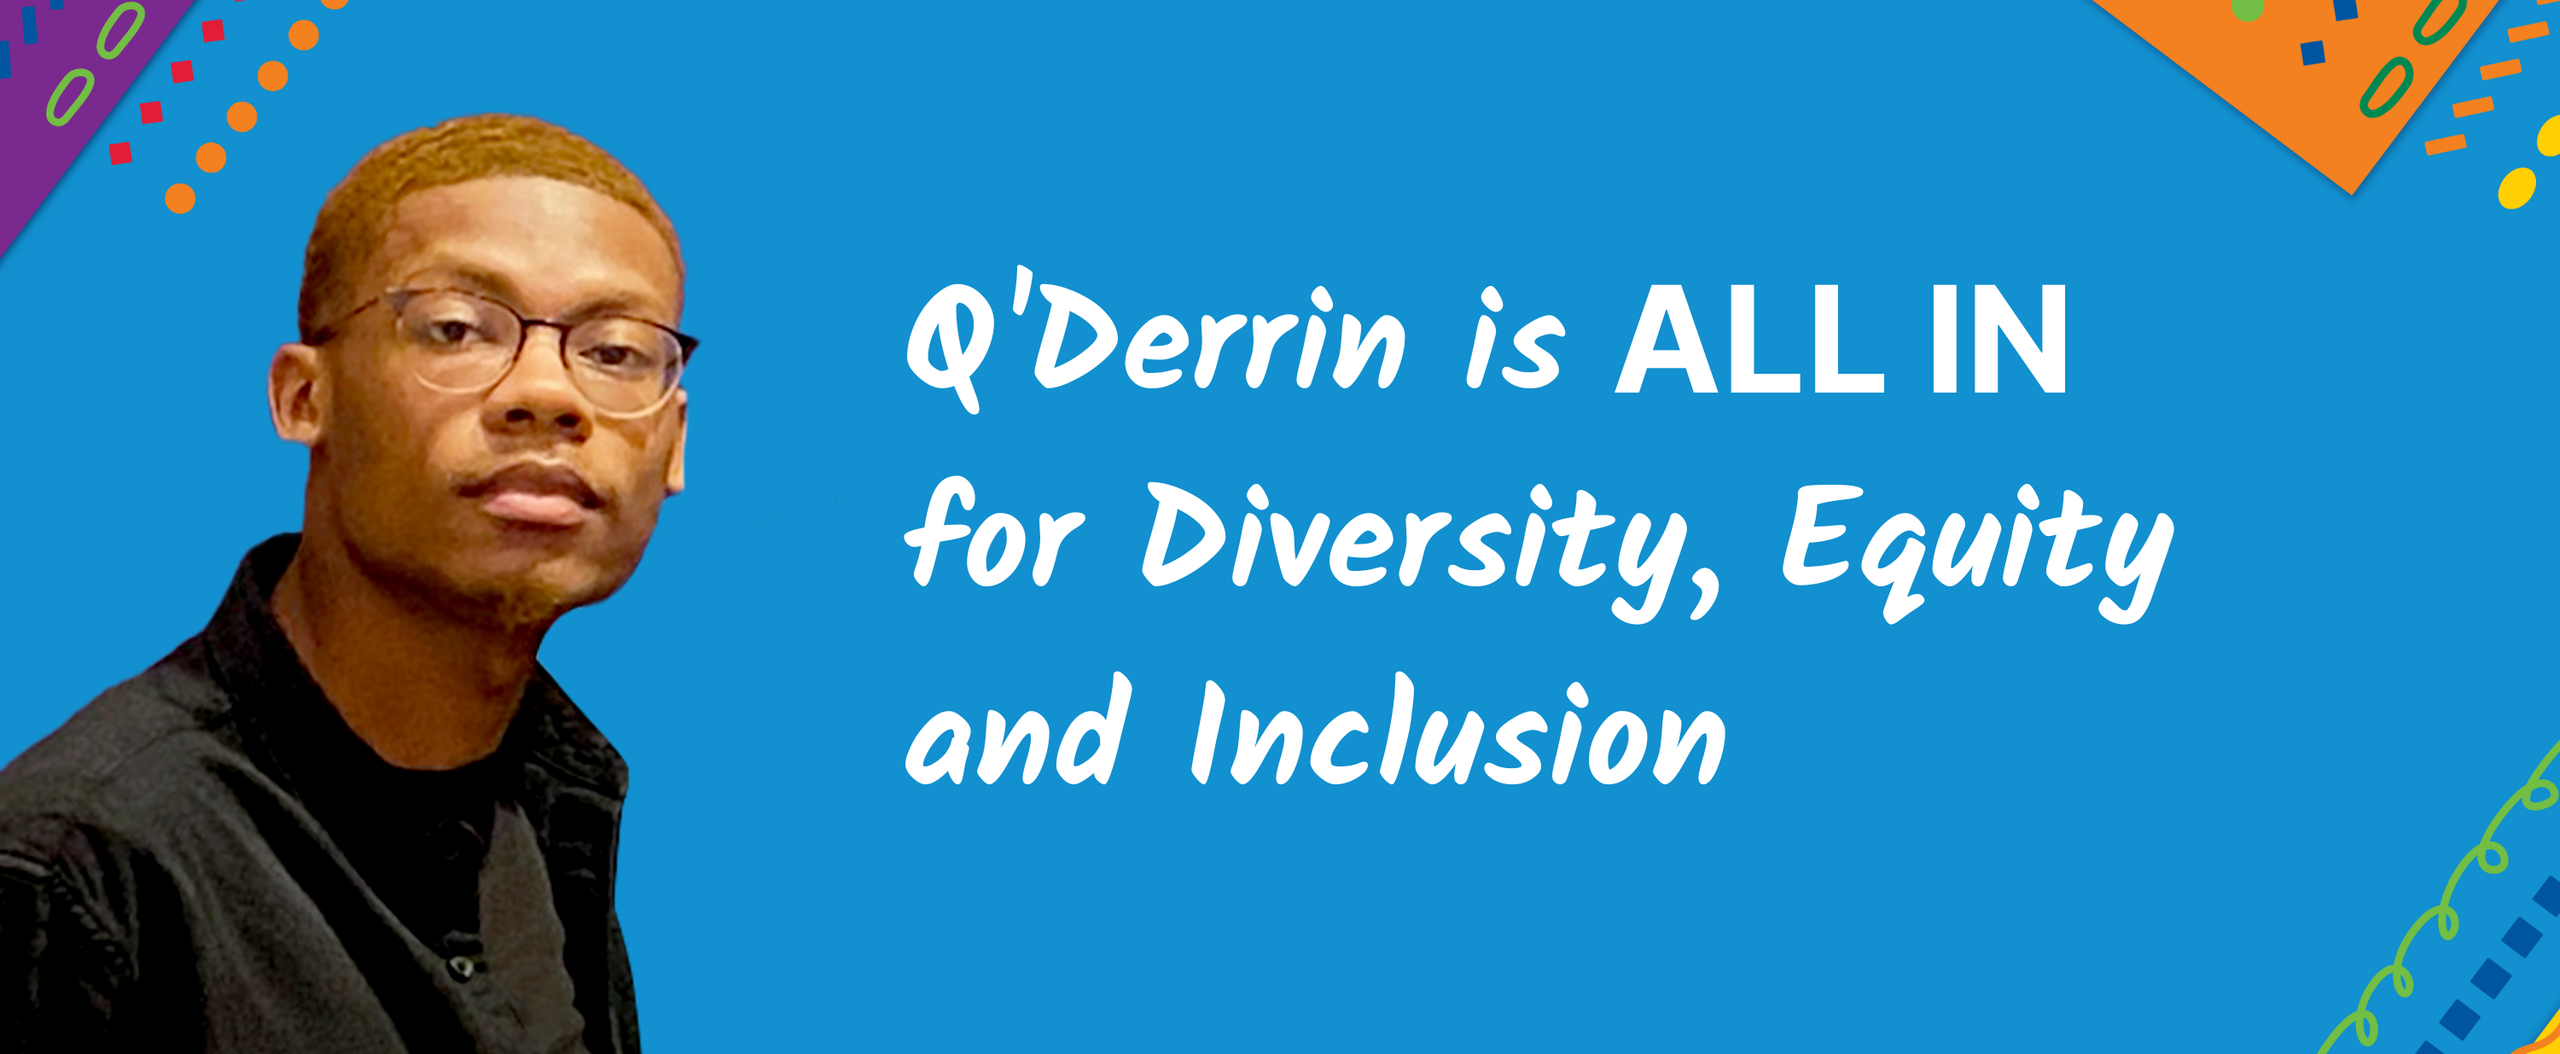 Q'Derrin is all in for Diversity, Equity and Inclusion